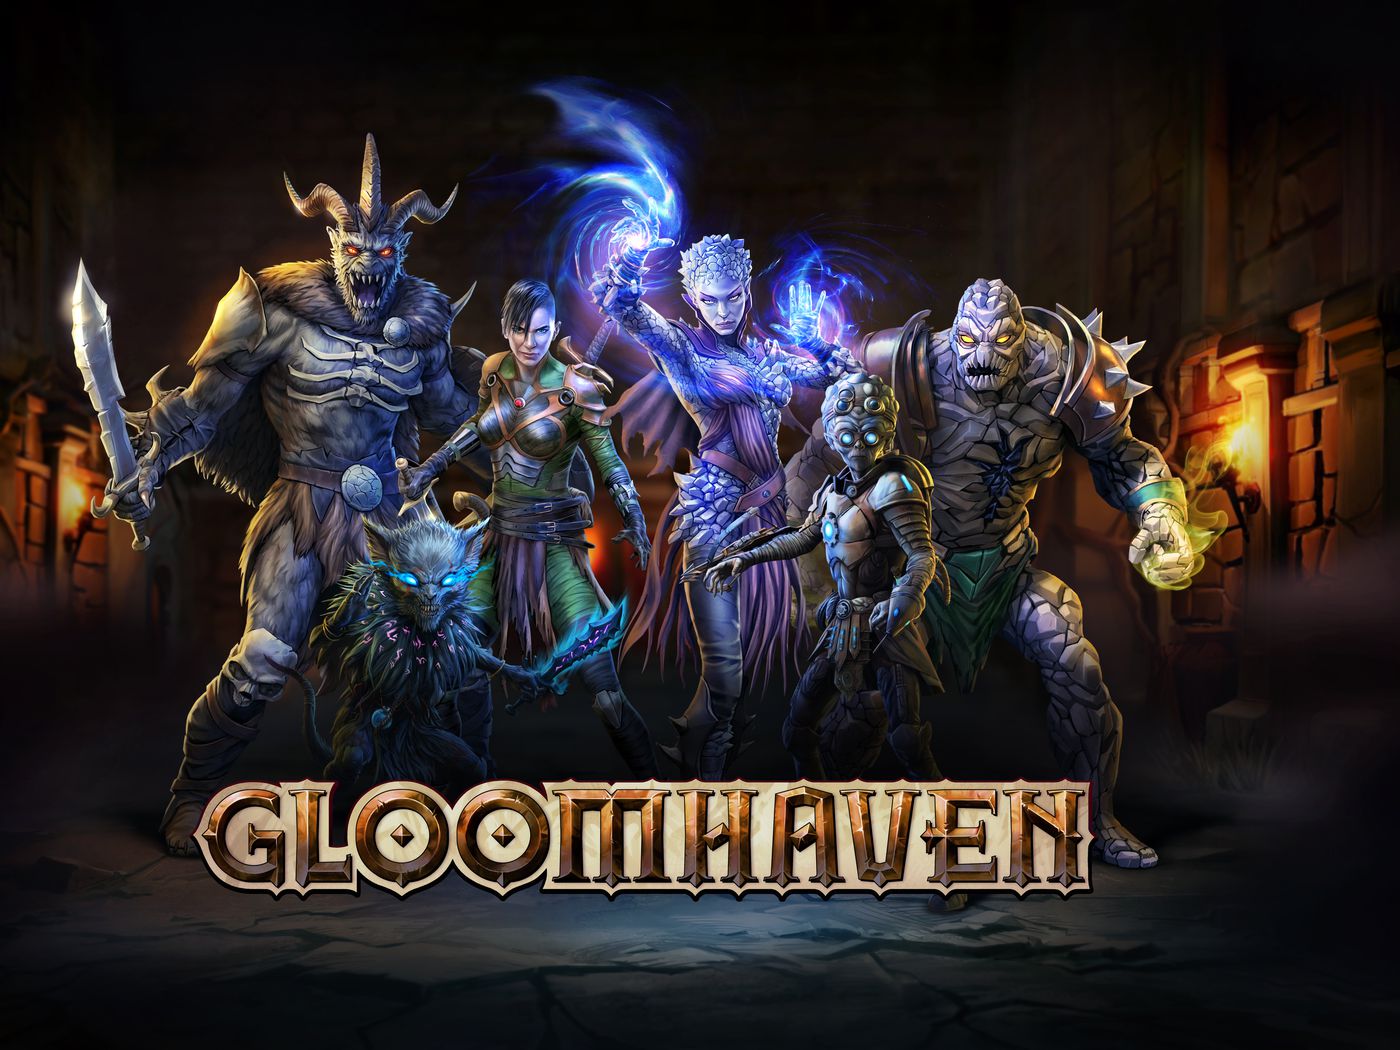 Gloomhaven  Console Release Trailer 